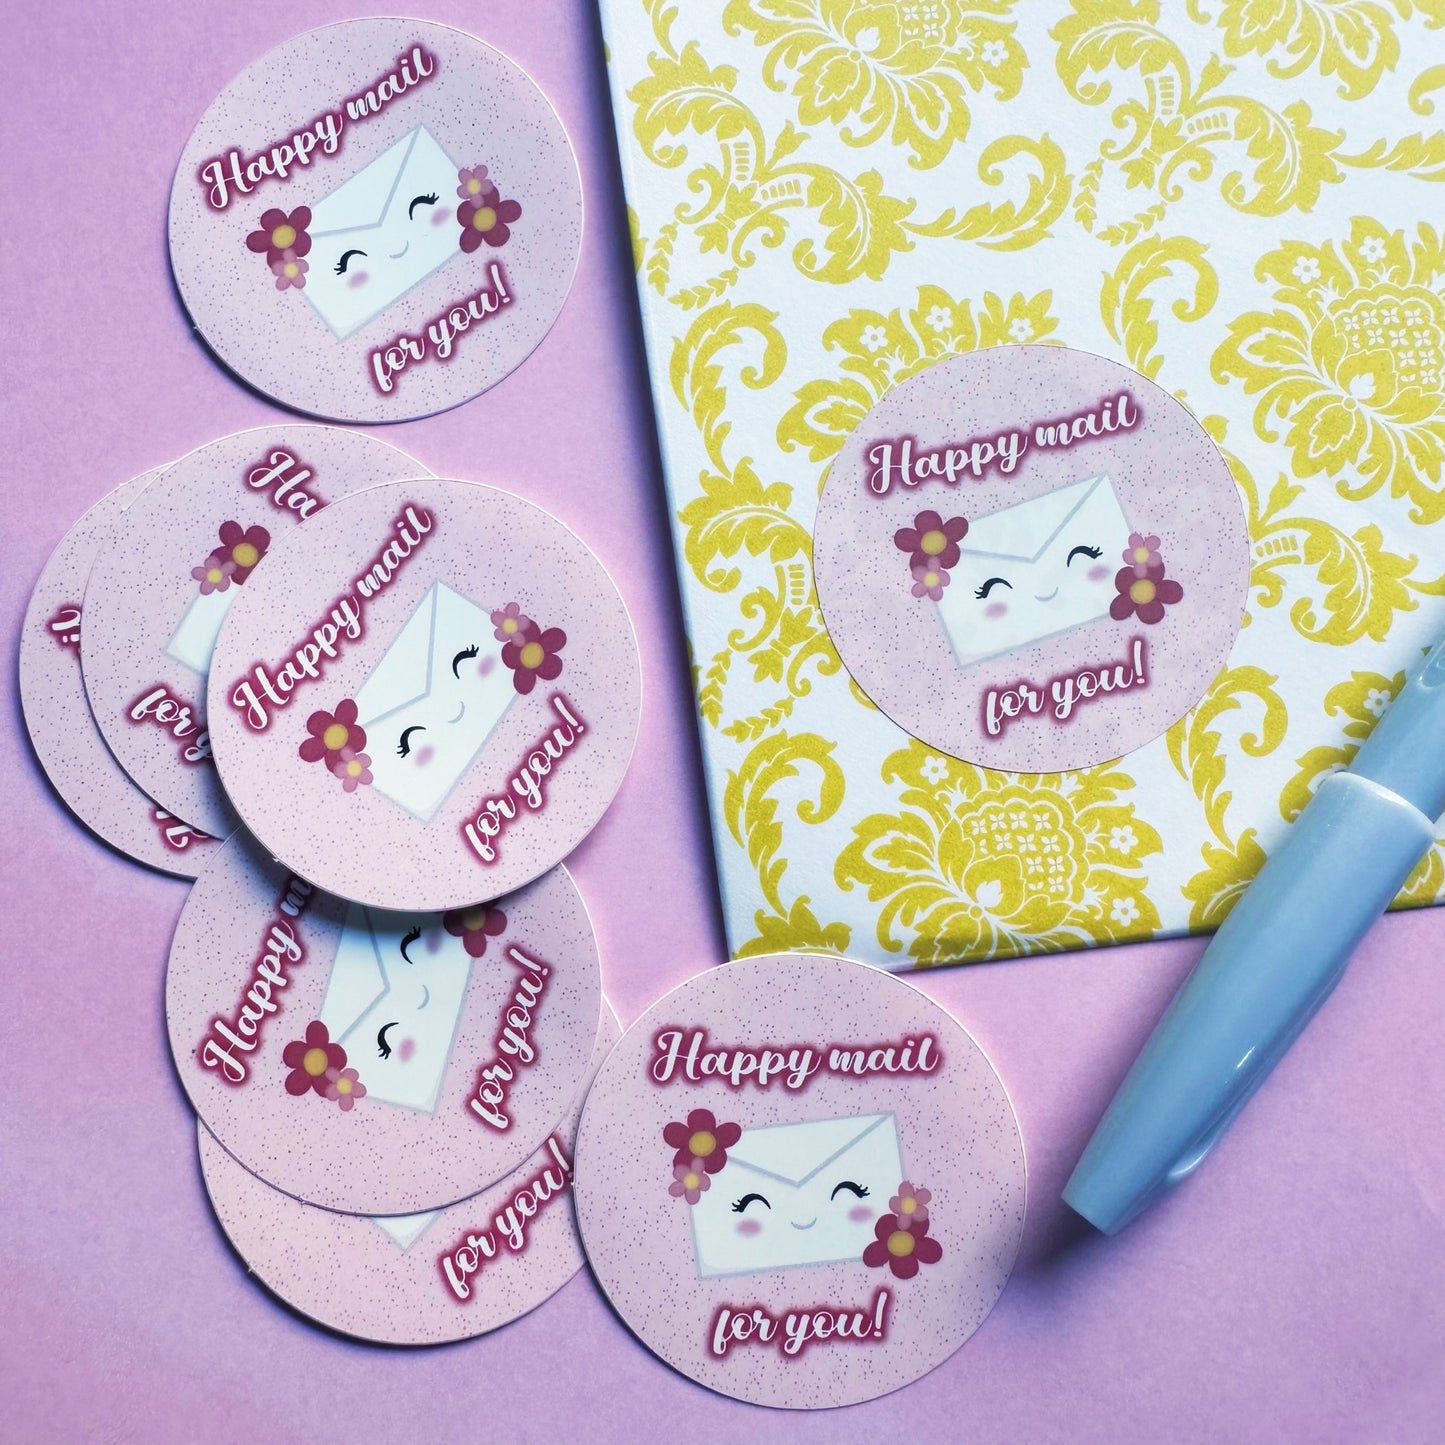 Happy mail for you - Round stickers